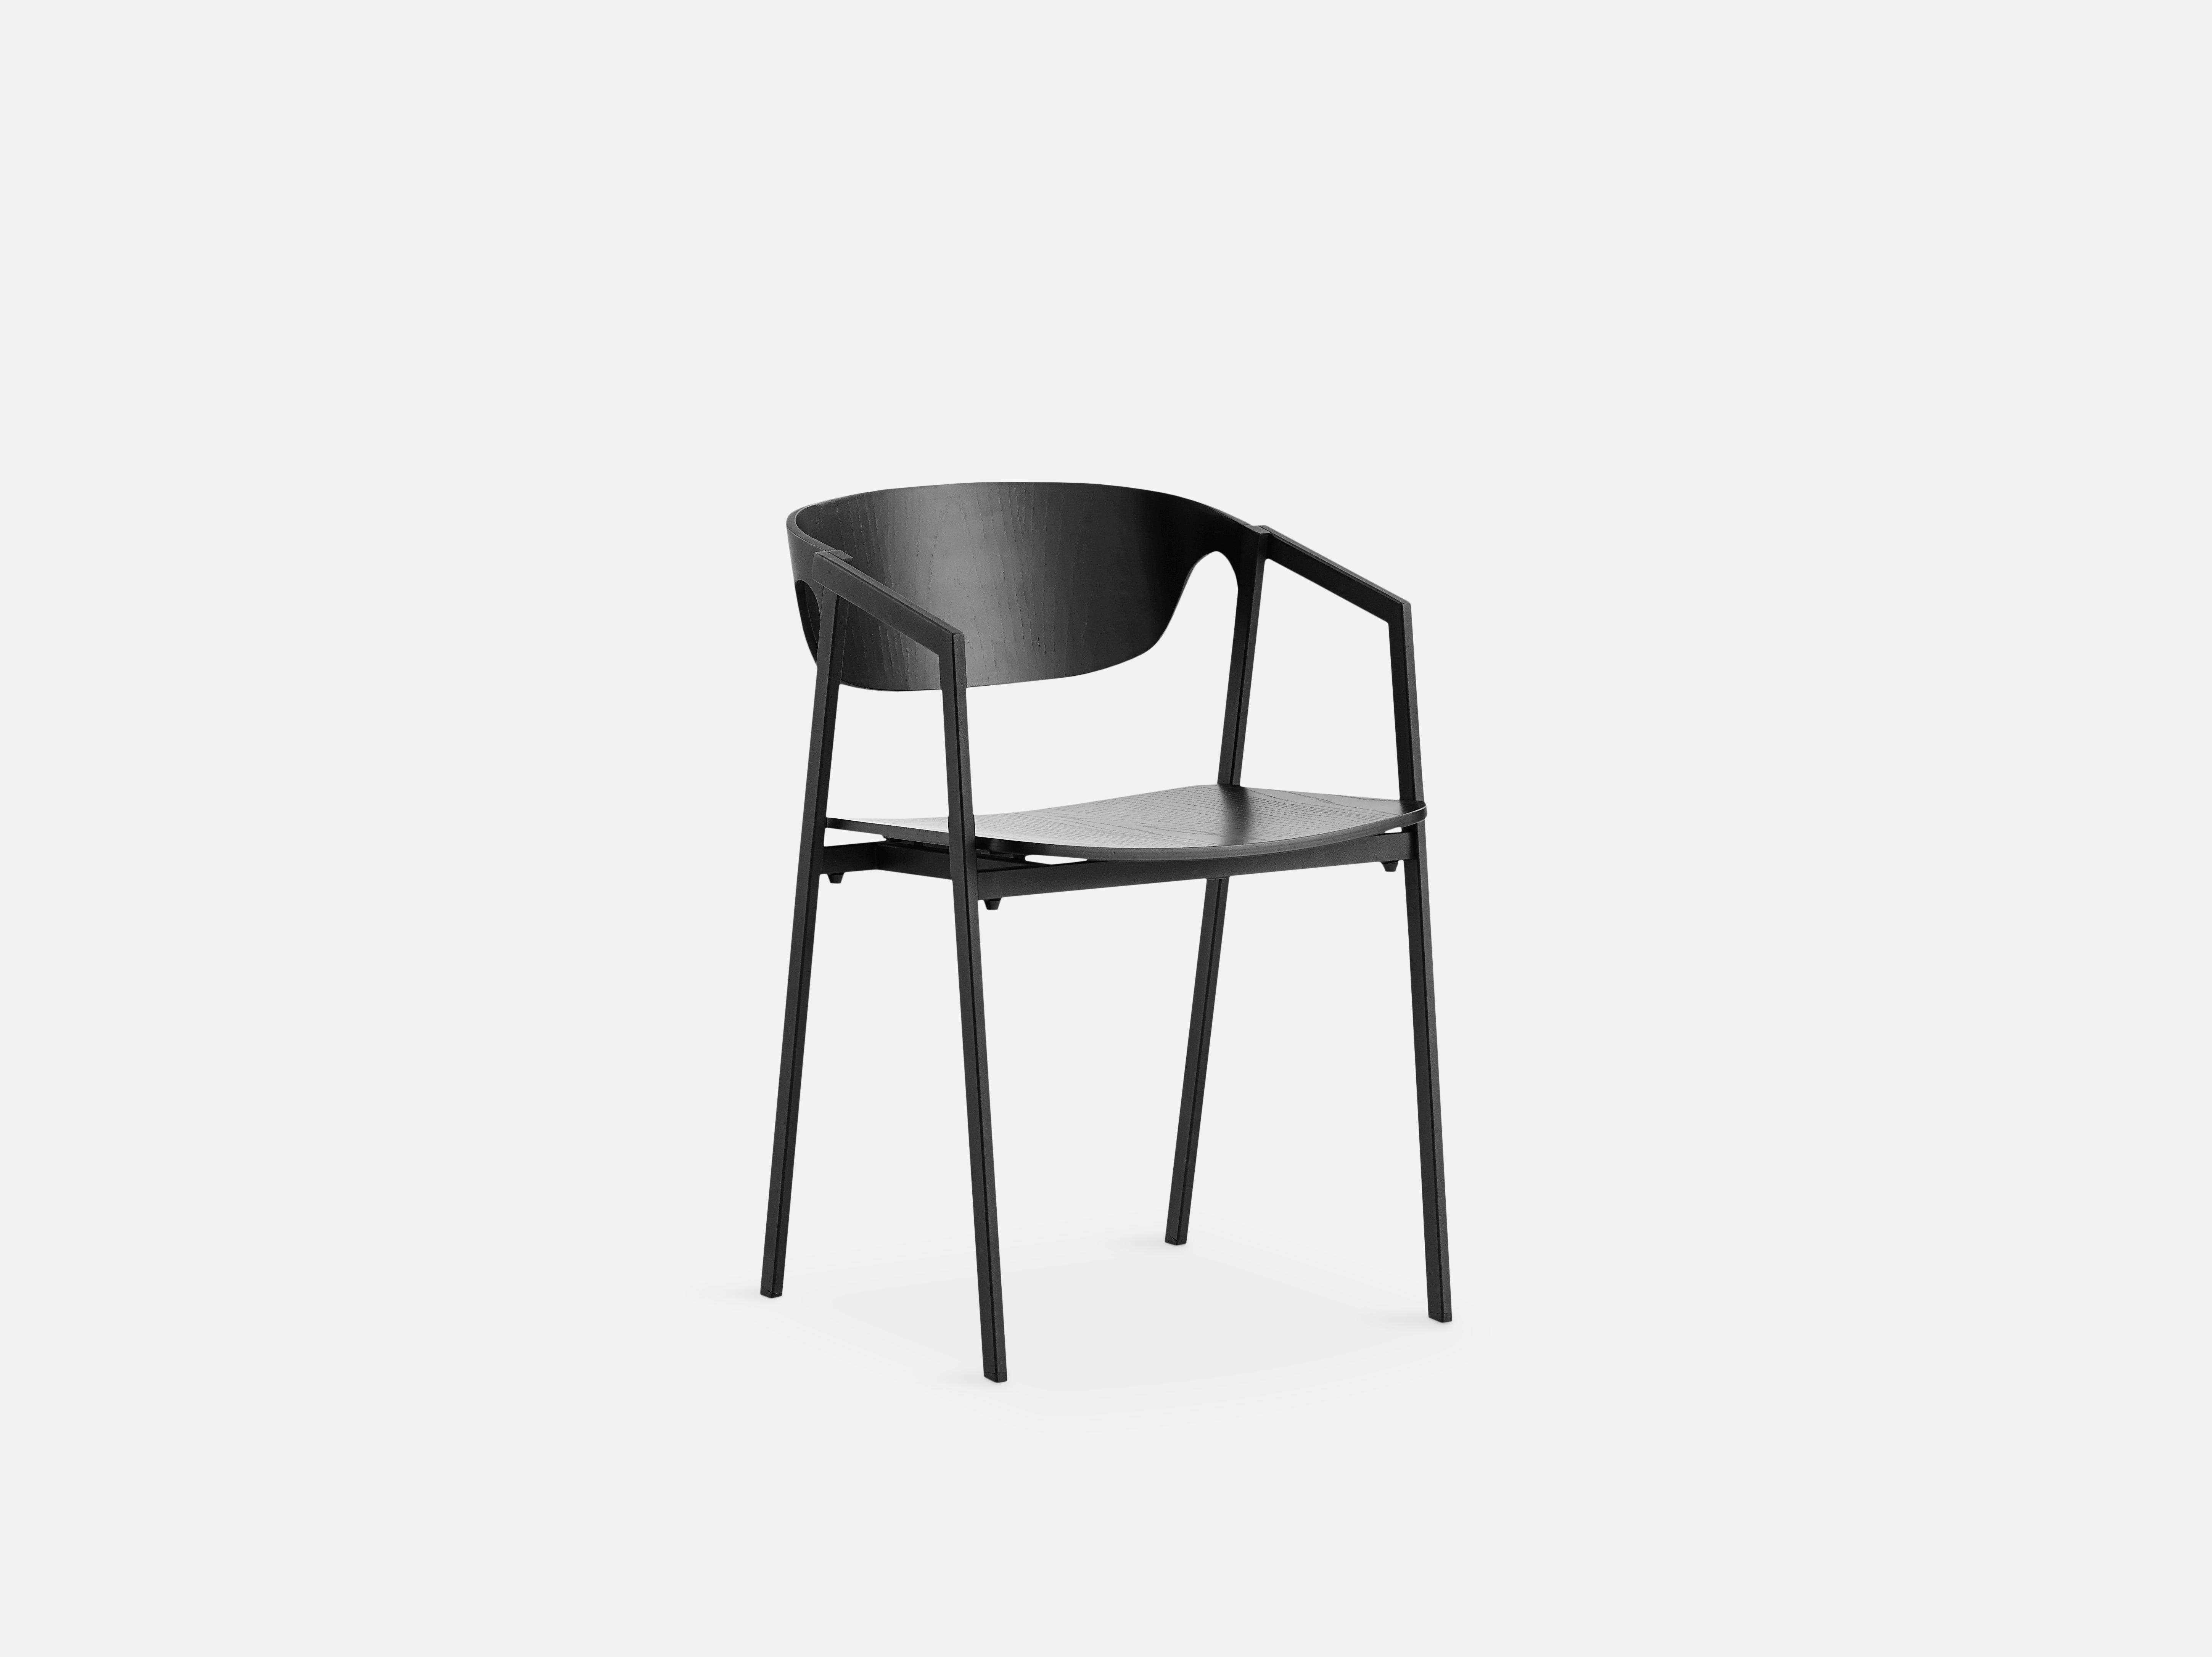 S.A.C. black dining chair by Naoya Matsuo
Materials: Metal, plywood with oak veneer
Dimensions: D 50 x W 48.3 x H 72.5 cm
Also available in different colors and finishes.

The founders, Mia and Torben Koed, decided to put their 30 years of